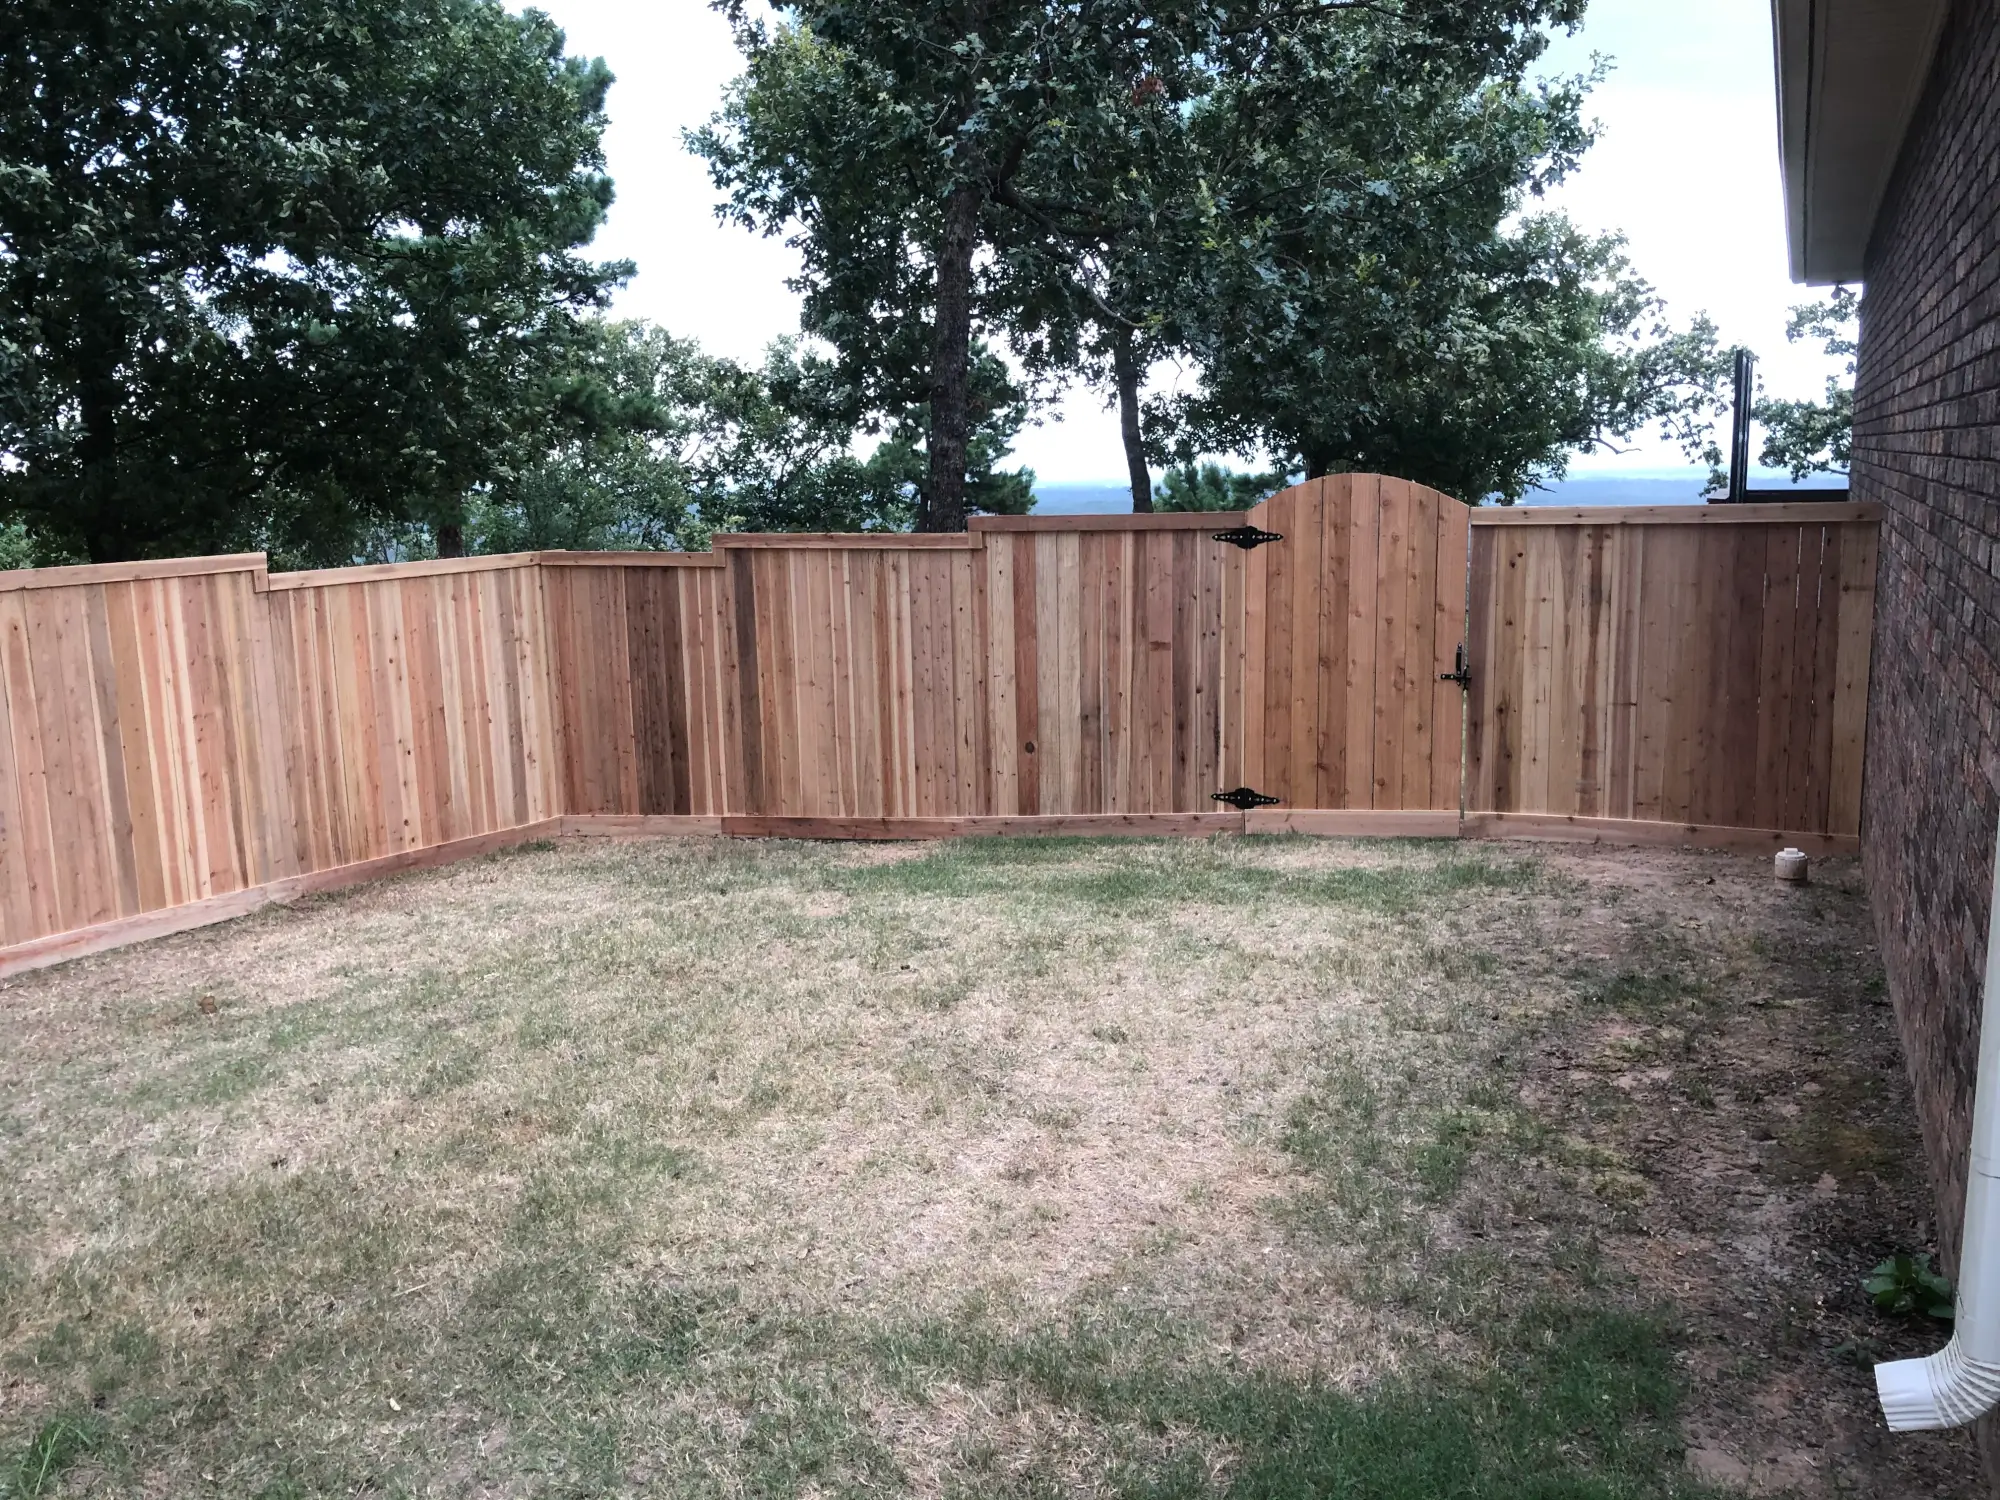 Residential wooden fence with arched gate